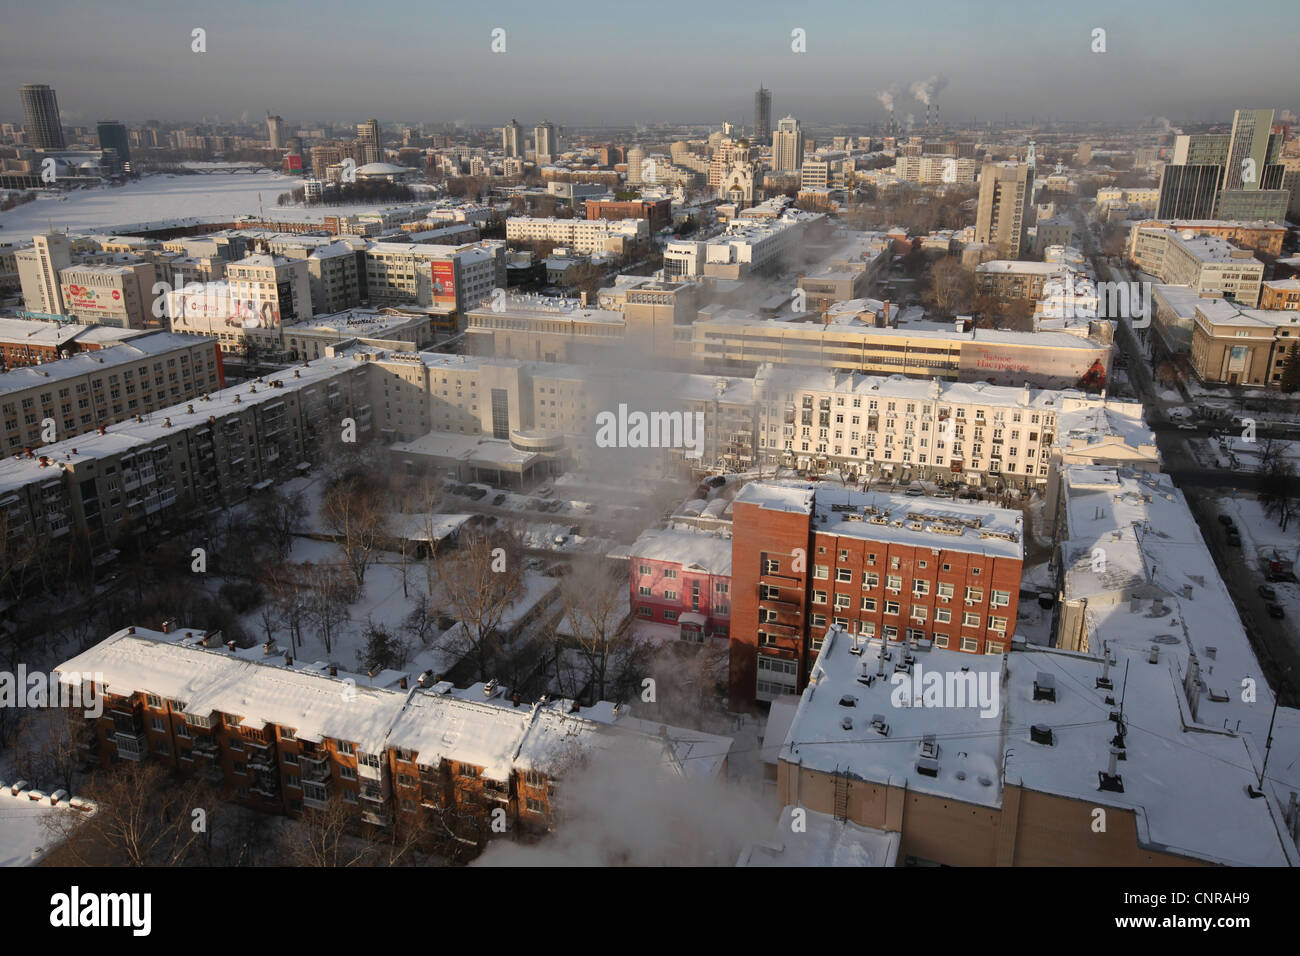 Panoramic view of the historical centre of Yekaterinburg, Russia, from the viewing point at the Antei Skyscraper. Stock Photo